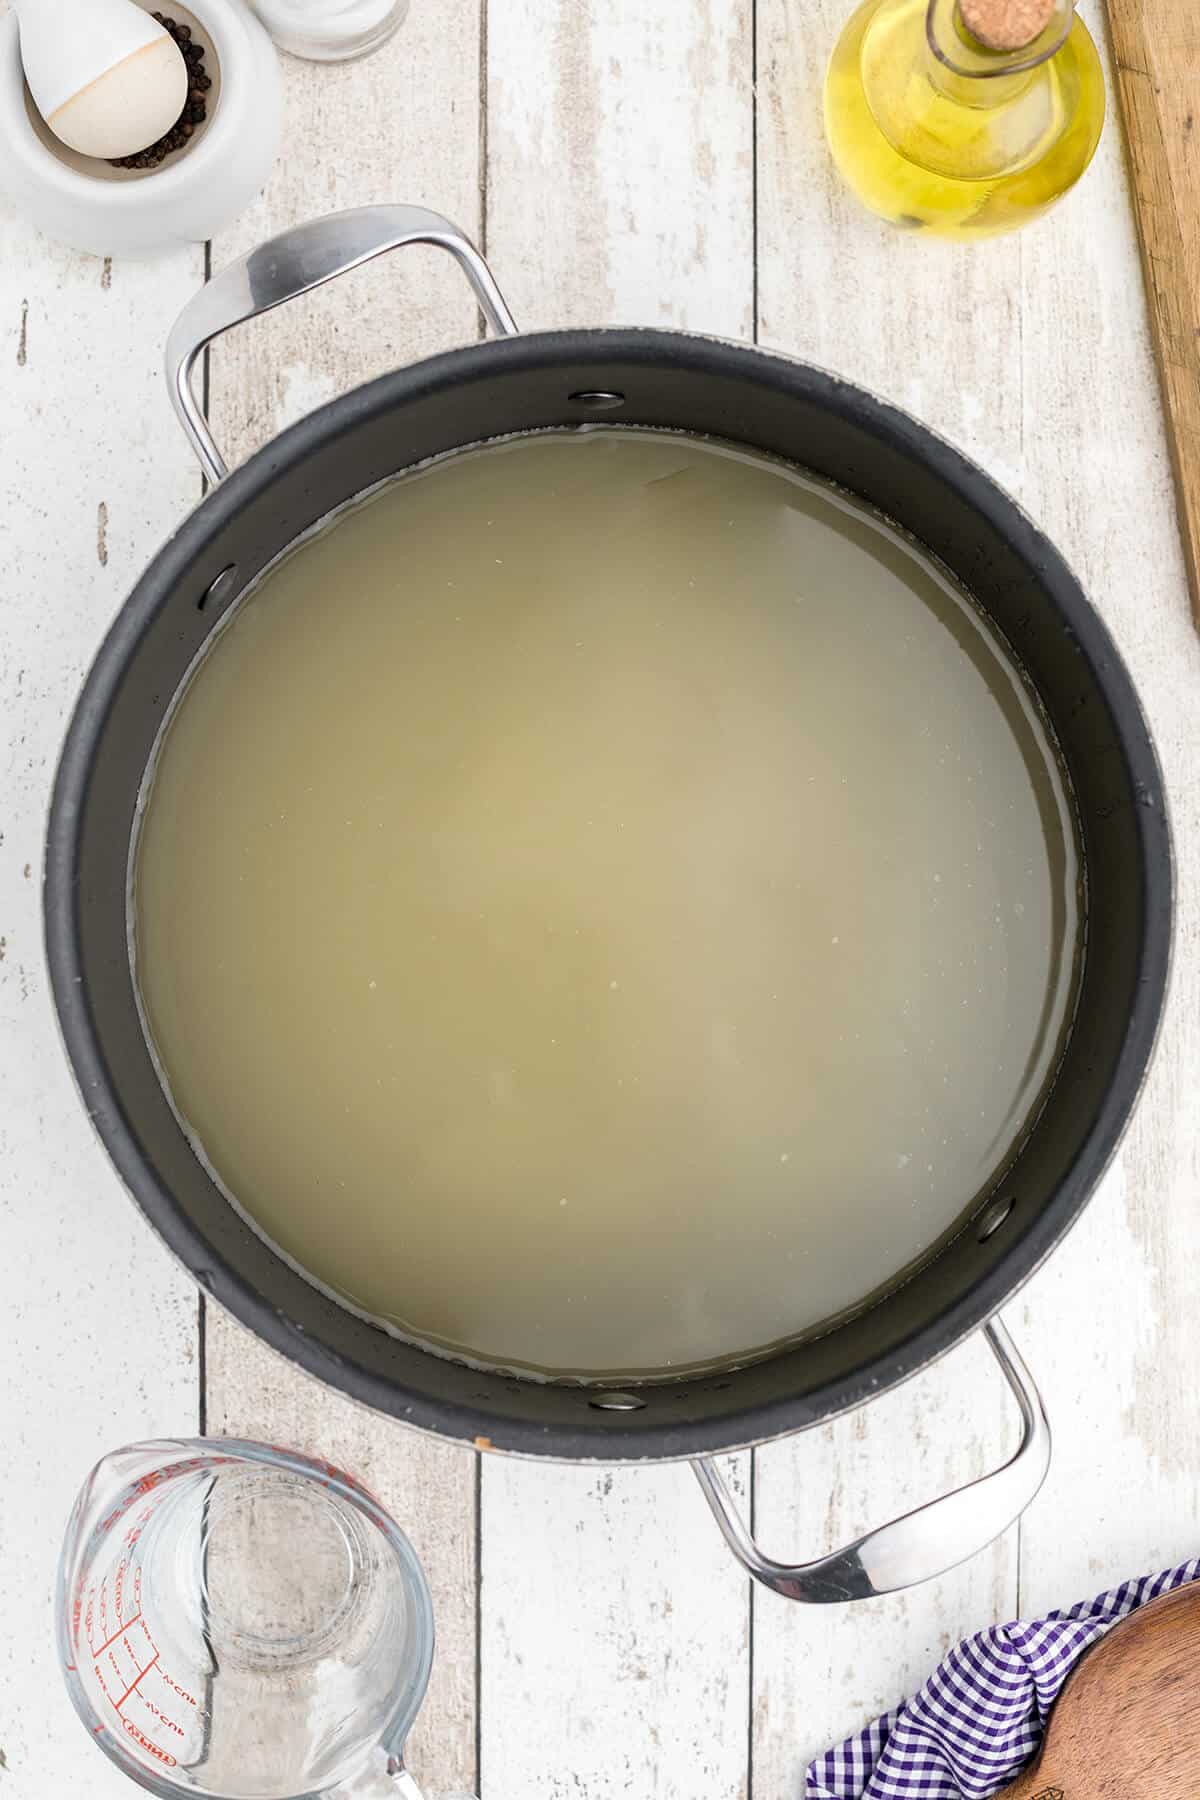 Stock heating in a pan.